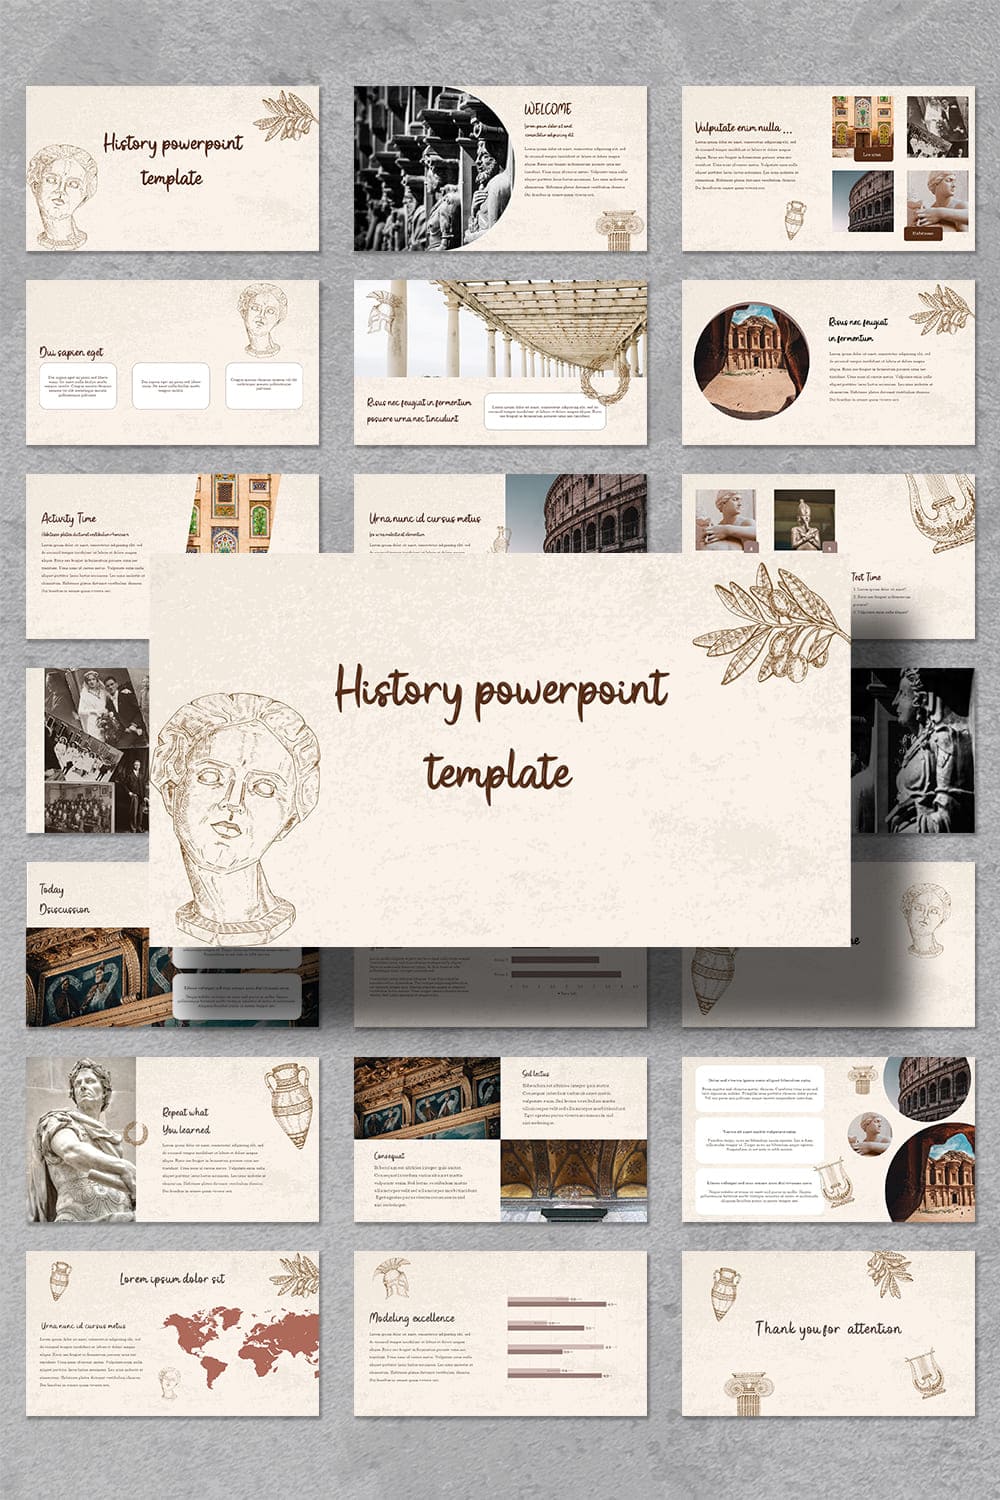 History powerpoint template, for pinterest 1000 by 1500 pixels.